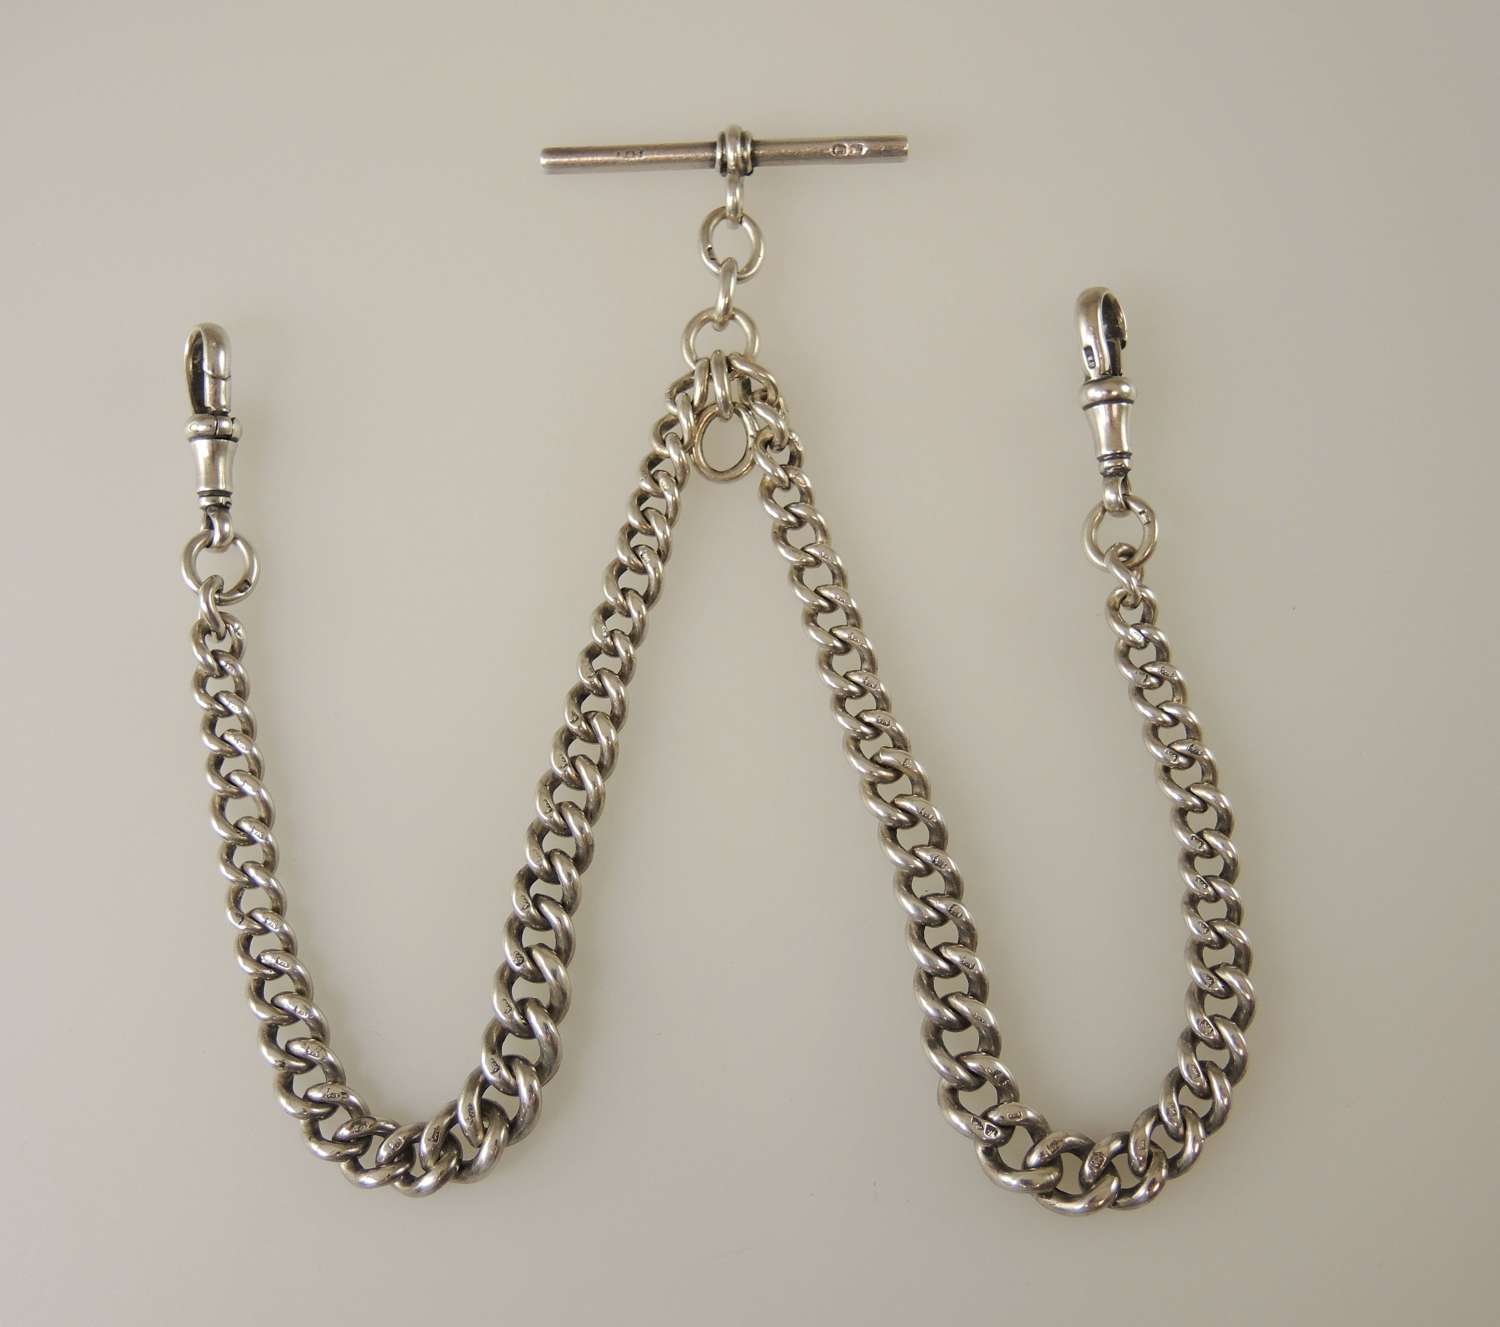 English Silver Double Watch chain c1898